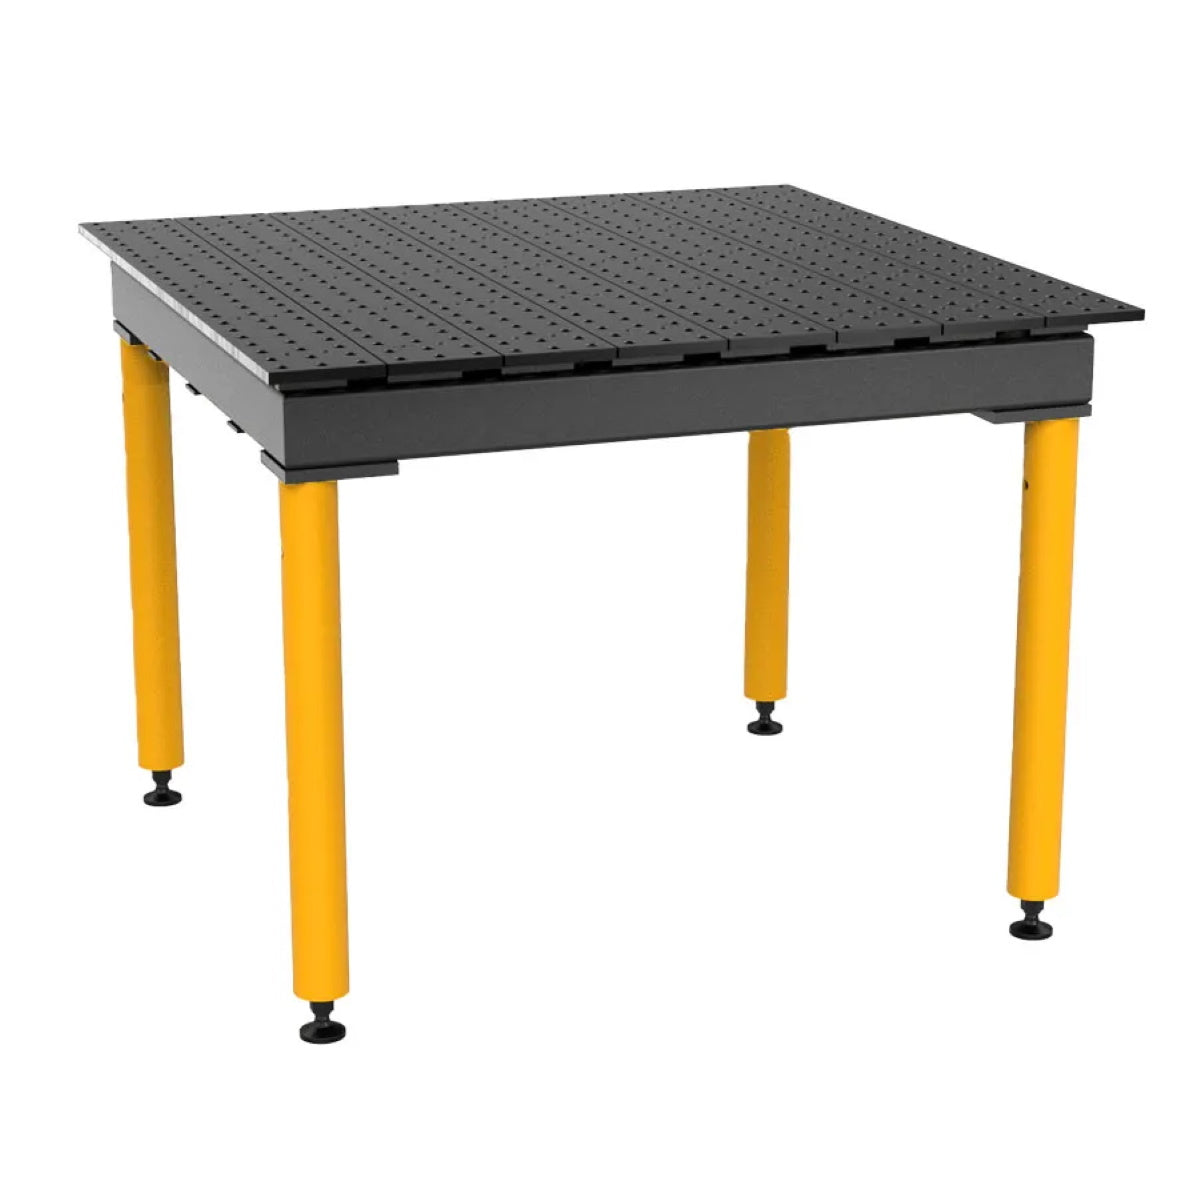 Build Pro Nitrided Max Table with Fixed Legs